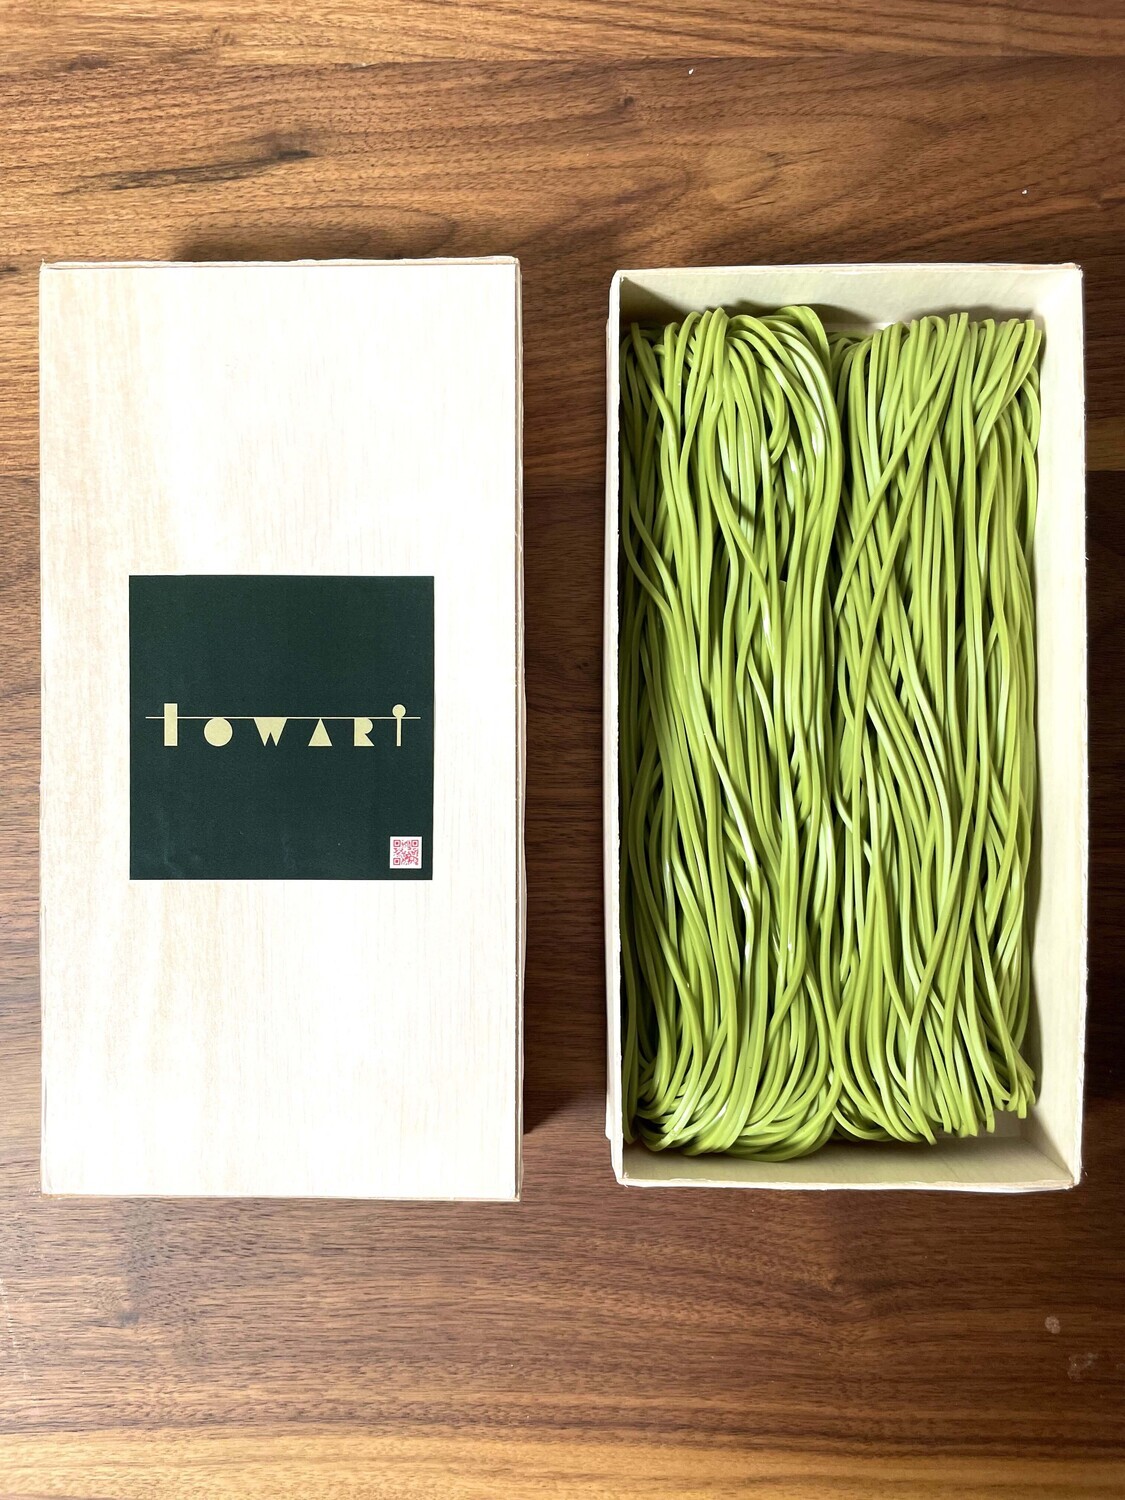 Matcha Soba Noodles(280g) with Gluten-free sauce (360g)